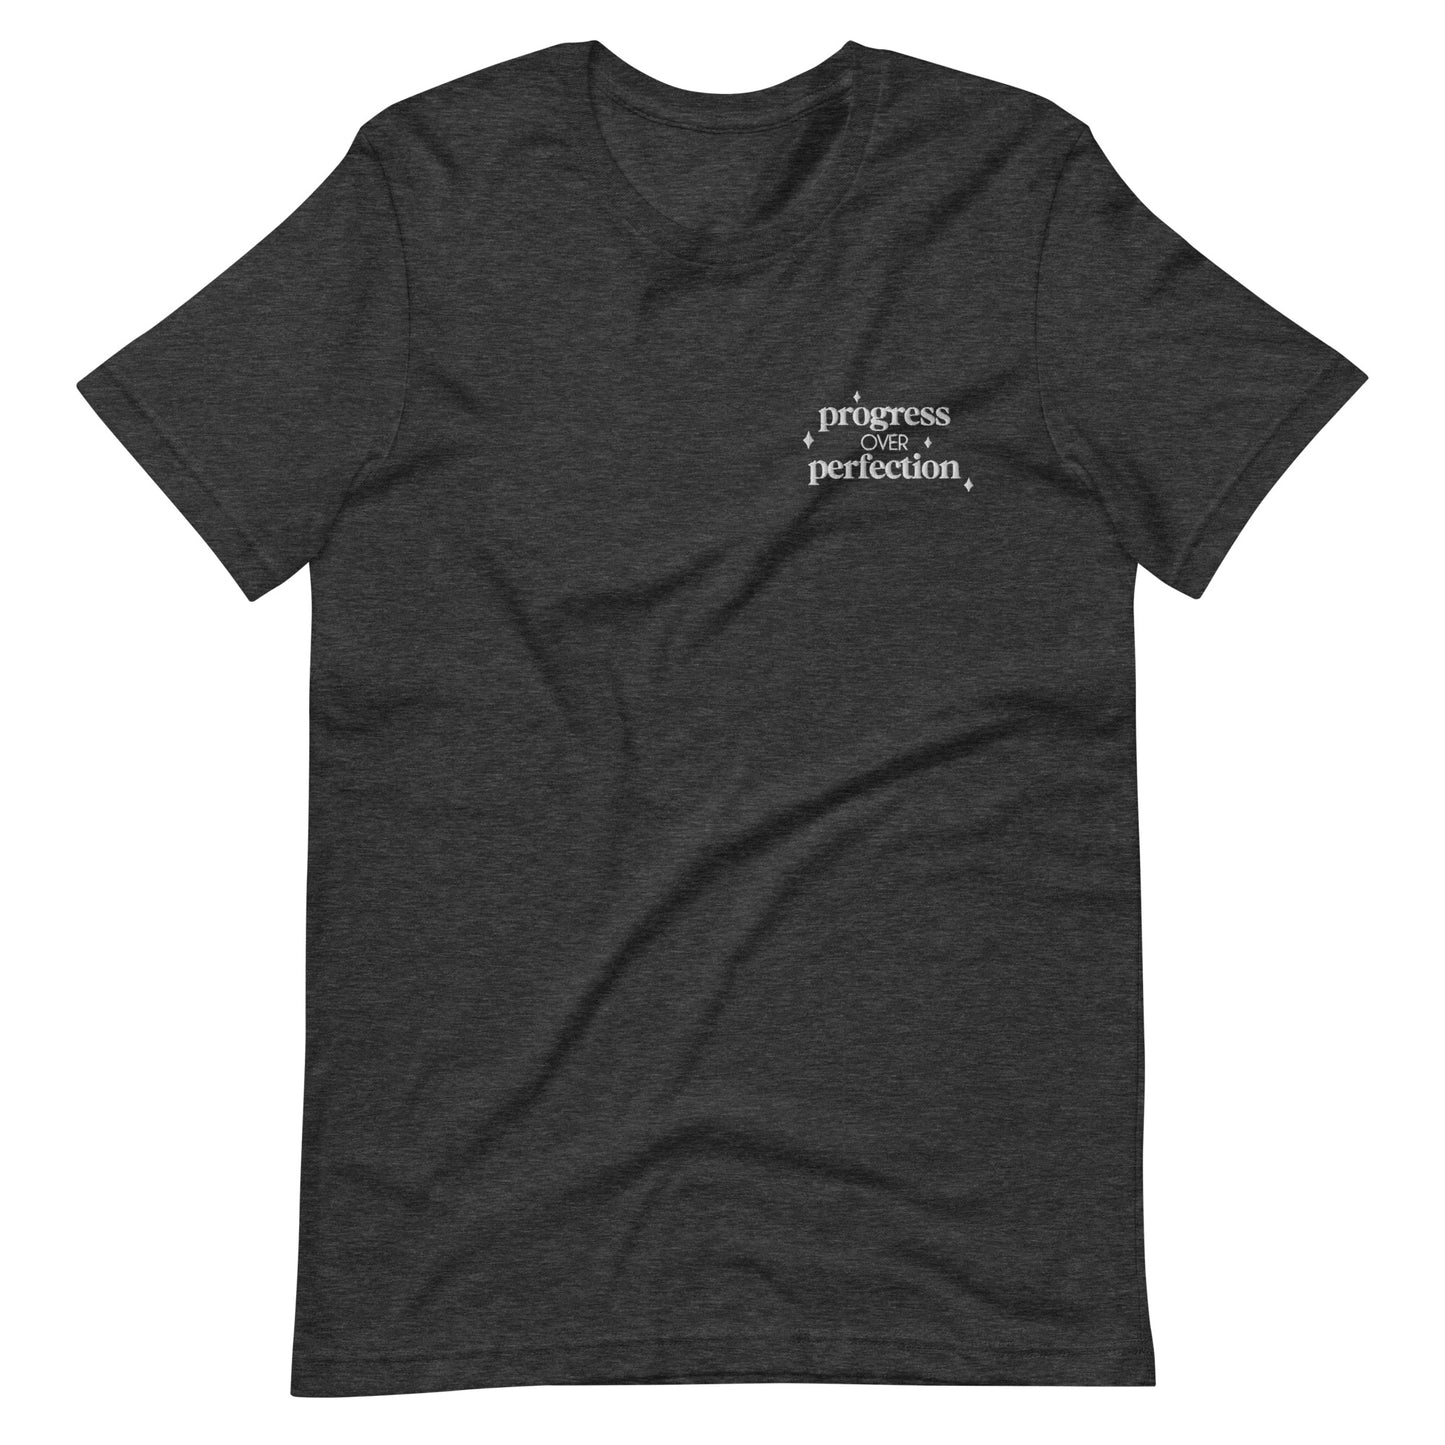 Progress over Perfection Embroidered Shirt